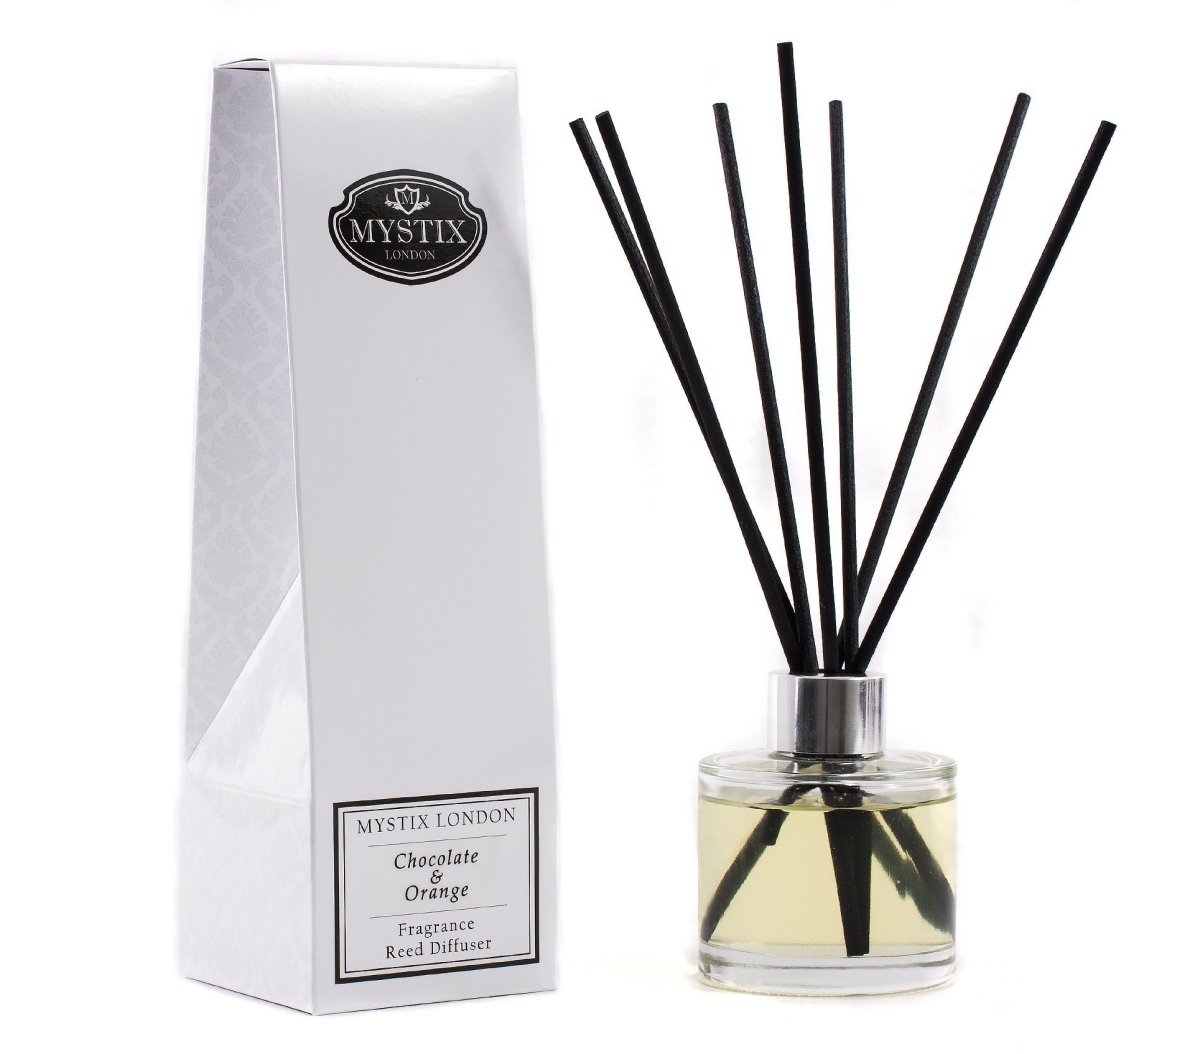 Chocolate & Orange - Fragrance Oil Reed Diffuser - Mystic Moments UK